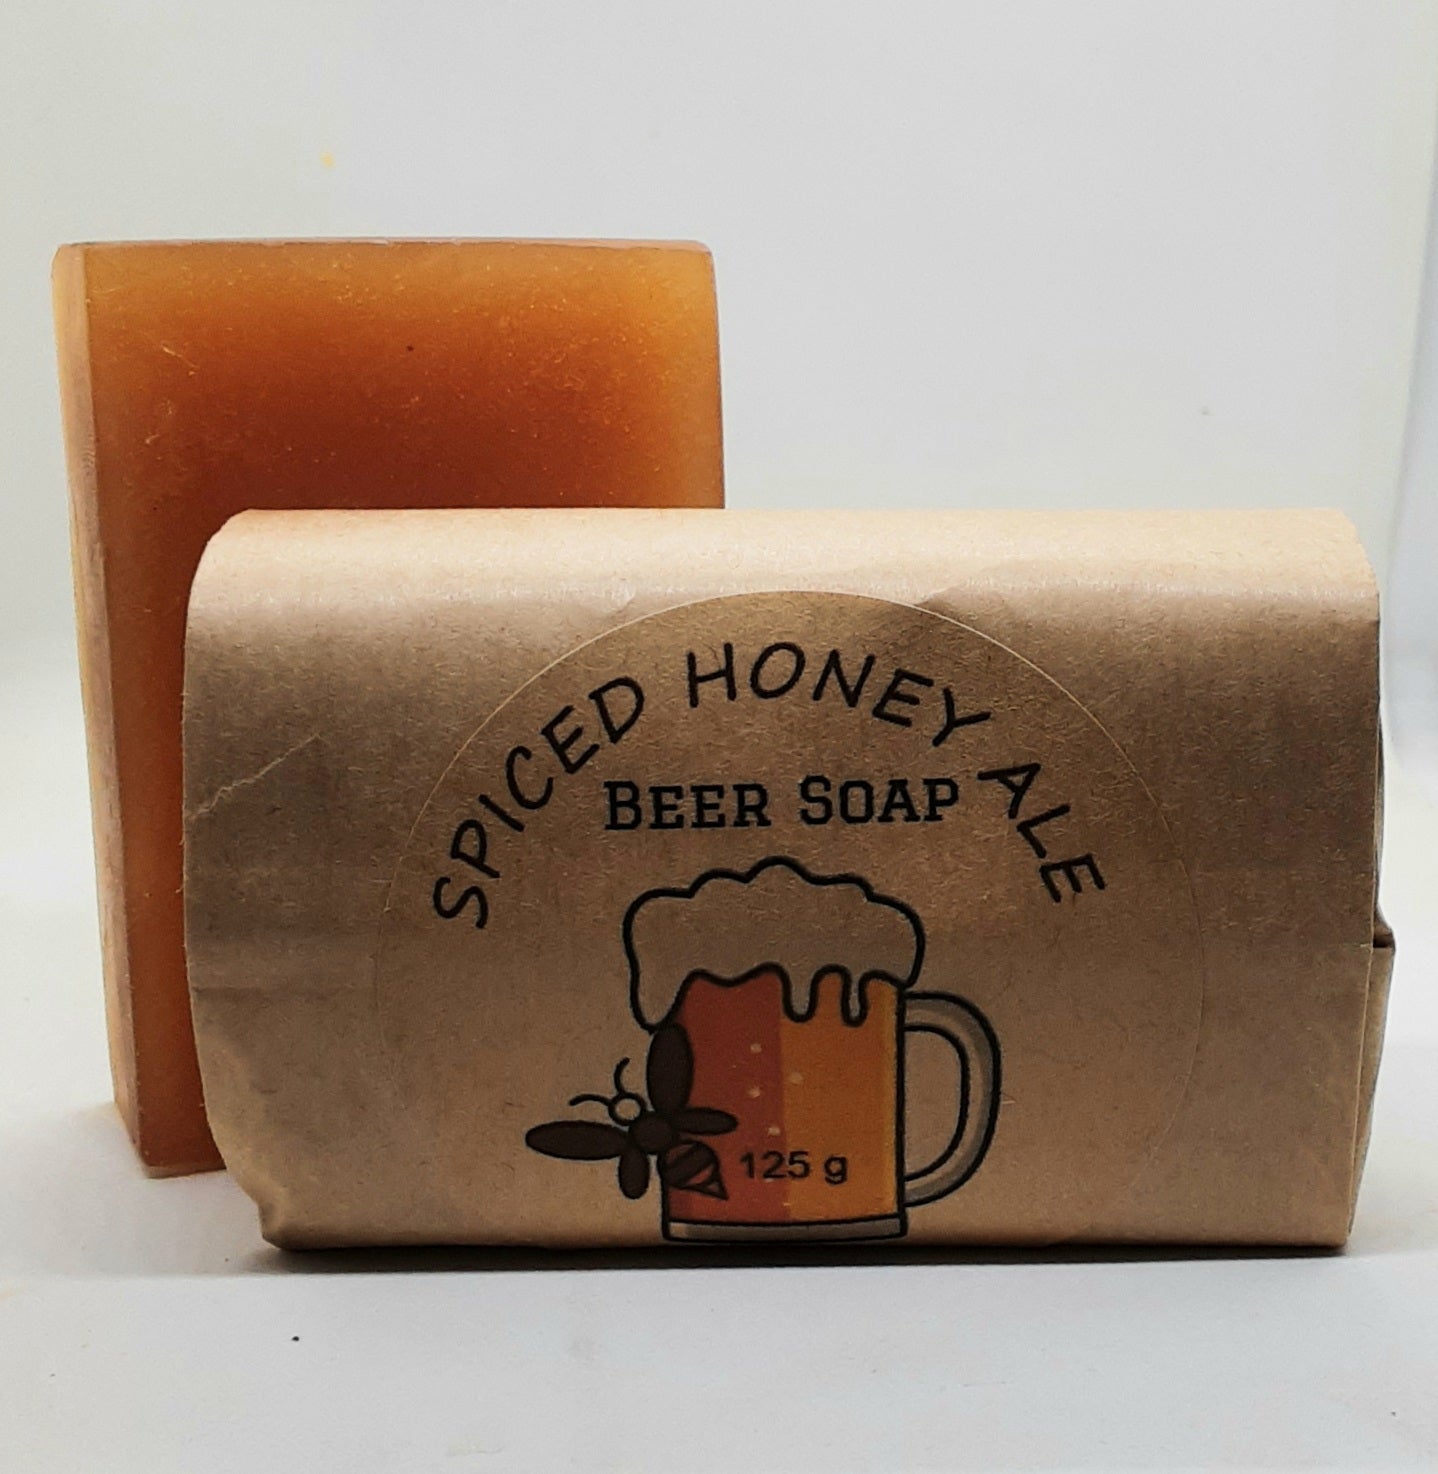 Real Beer Soap - Spiced Honey Ale - Naturally Coloured, SLS and SLSA Free